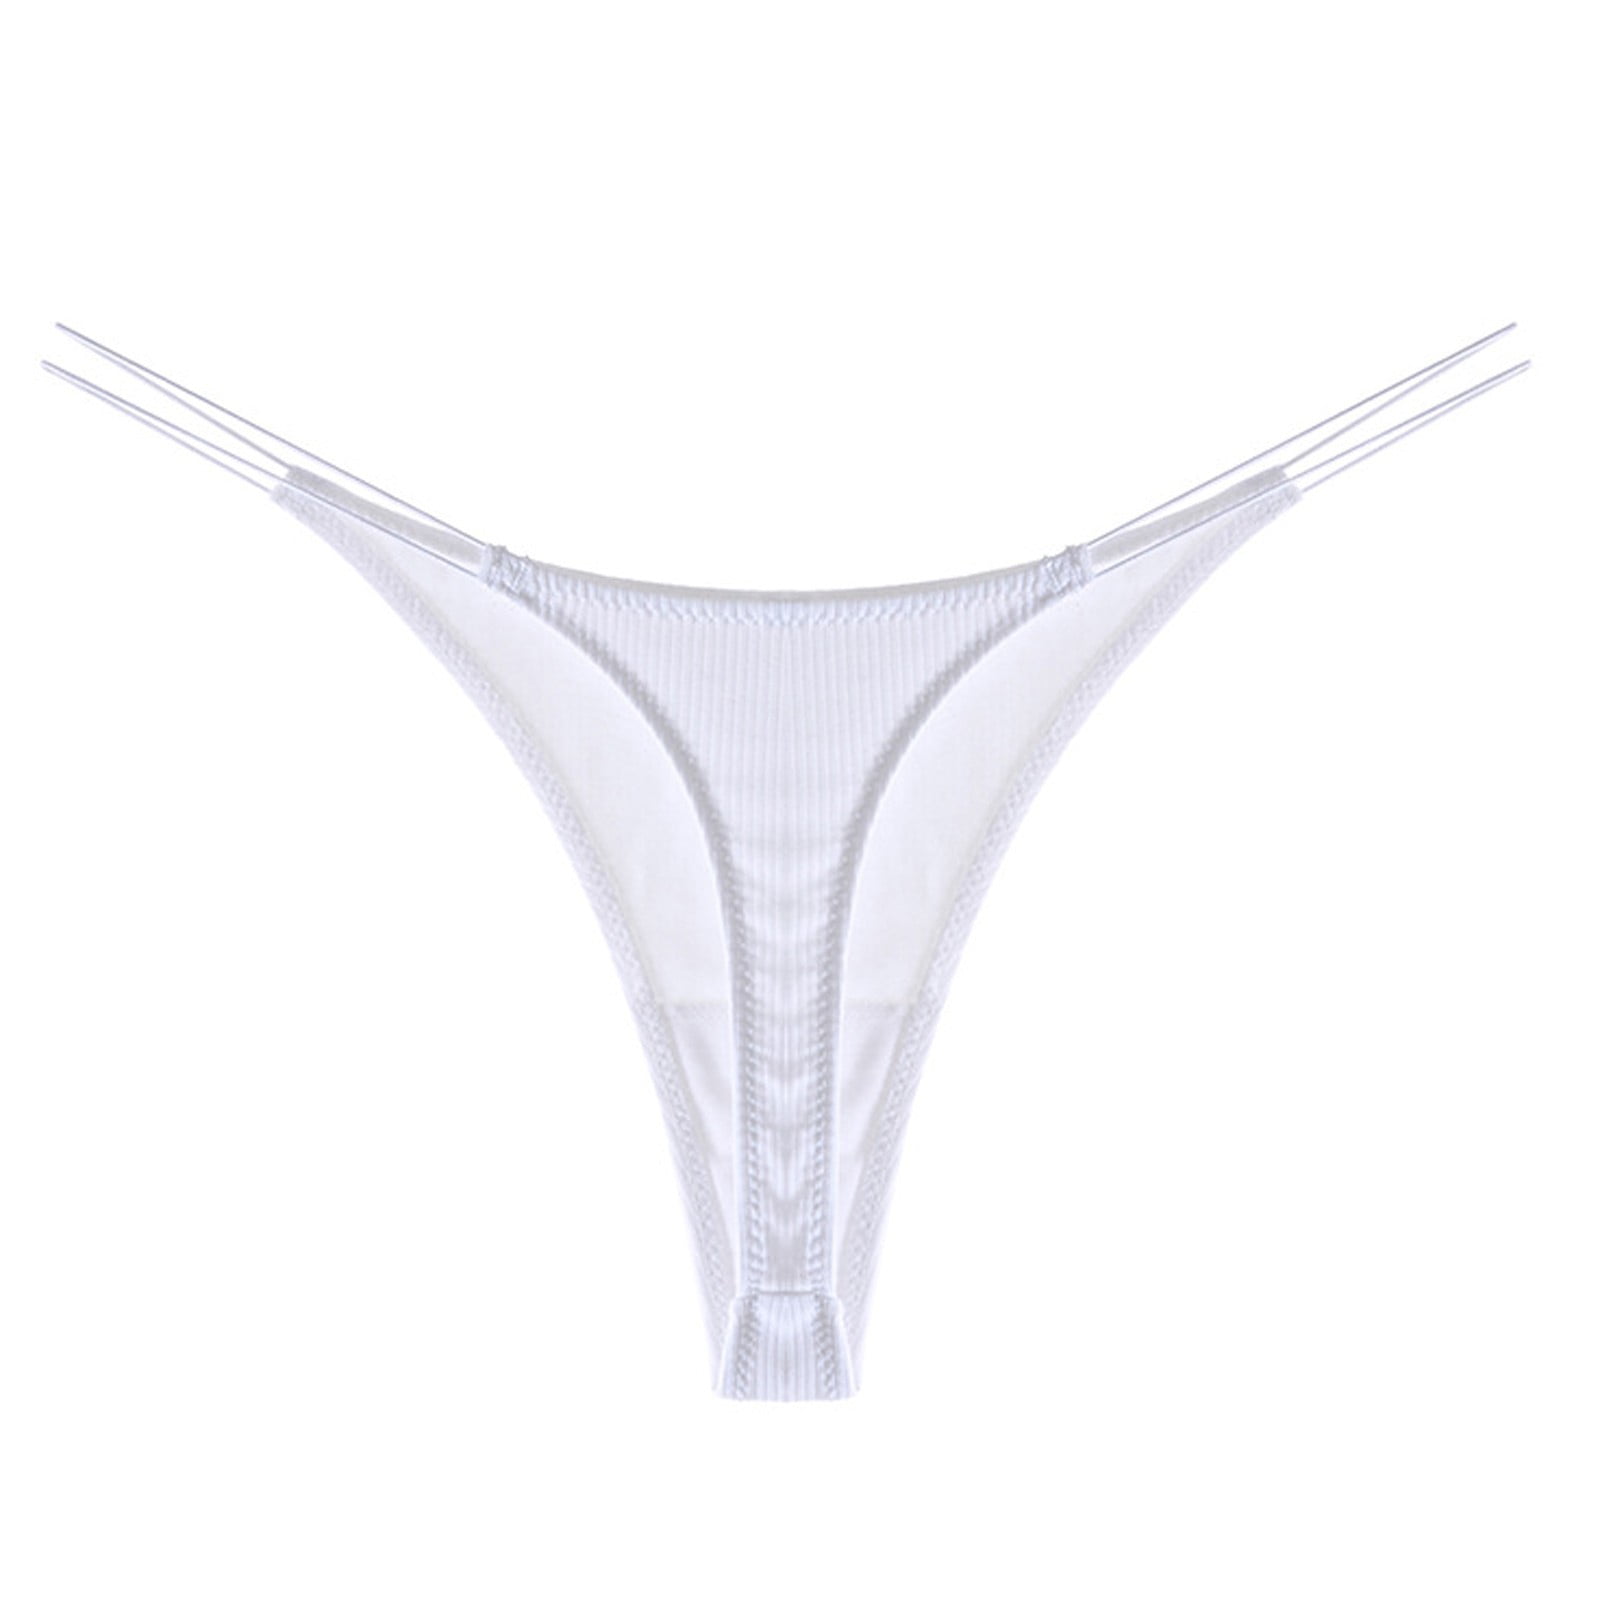 BUIgtTklOP Underwear Women,Women Silky Comfy Low Waist Breathable Sexy  Nylon Has Elasticity Underpant White XS 